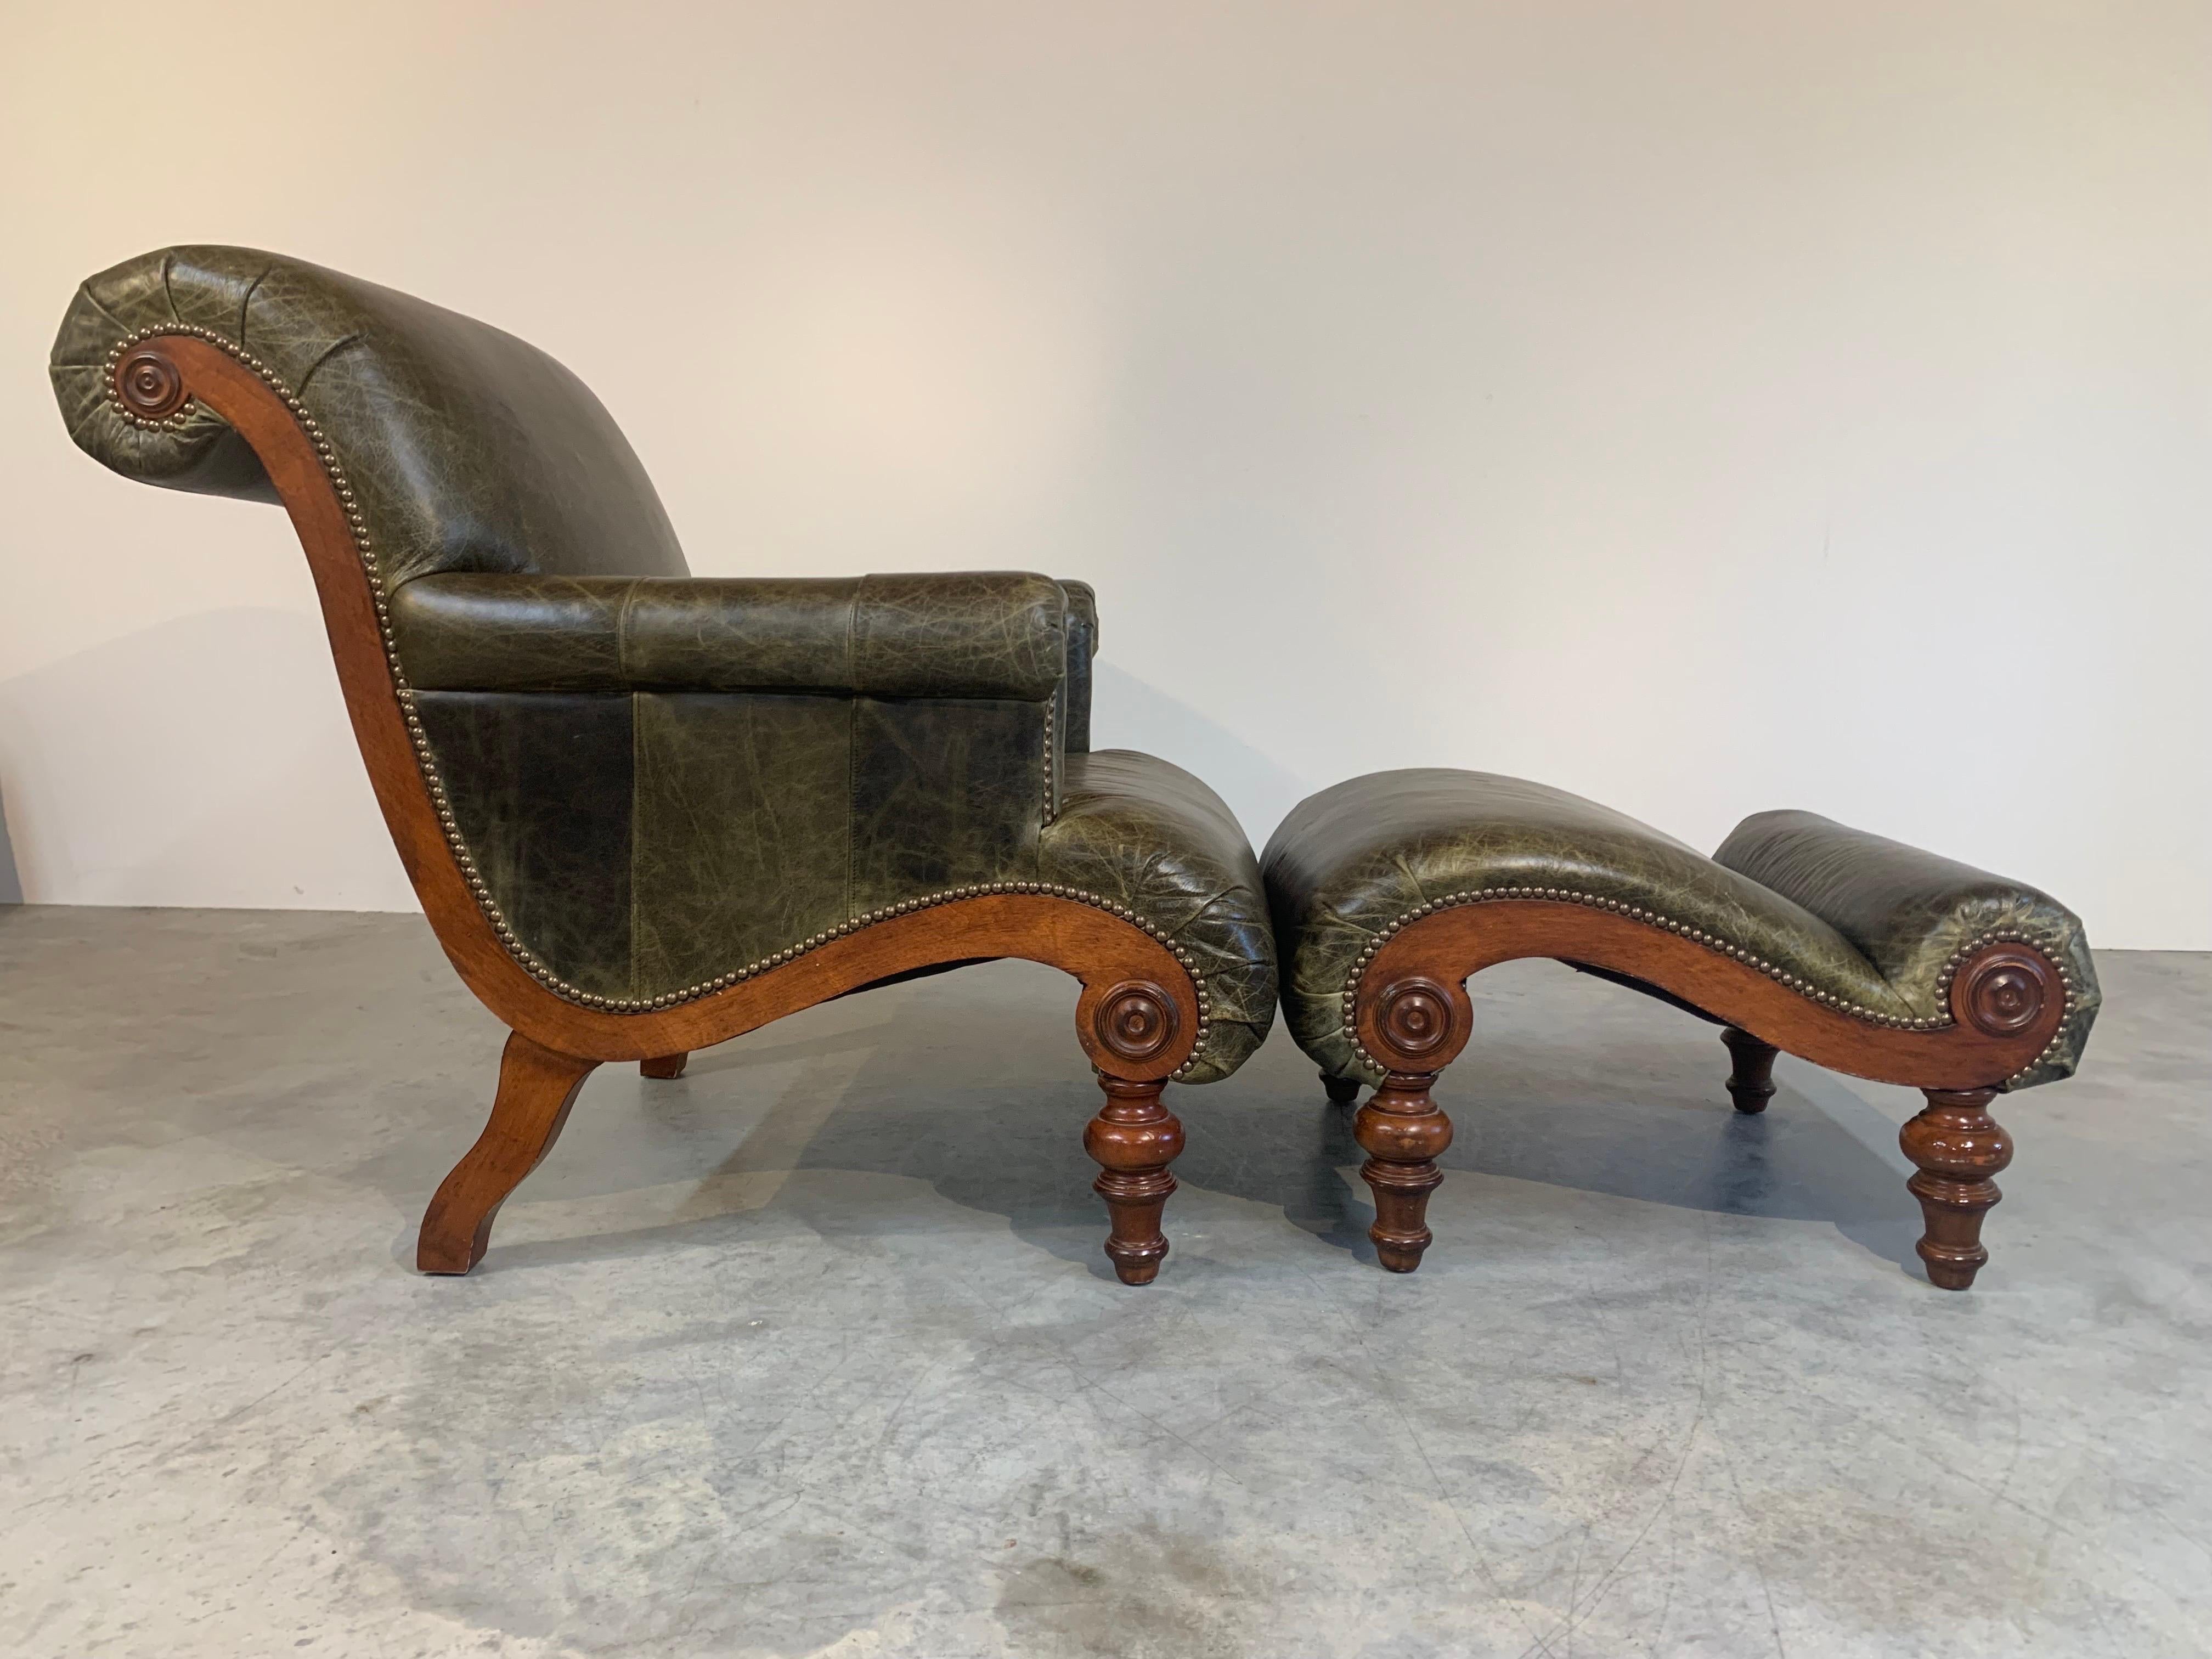 Hathaway lounge chair and ottoman by Drexel Heritage designed in a contemporary British colonial style and reminiscent of a plantation chair in form. Walnut legs with supple deep green aniline leather.

Ottoman Dimensions: 17 x 24 x 29” HWD.